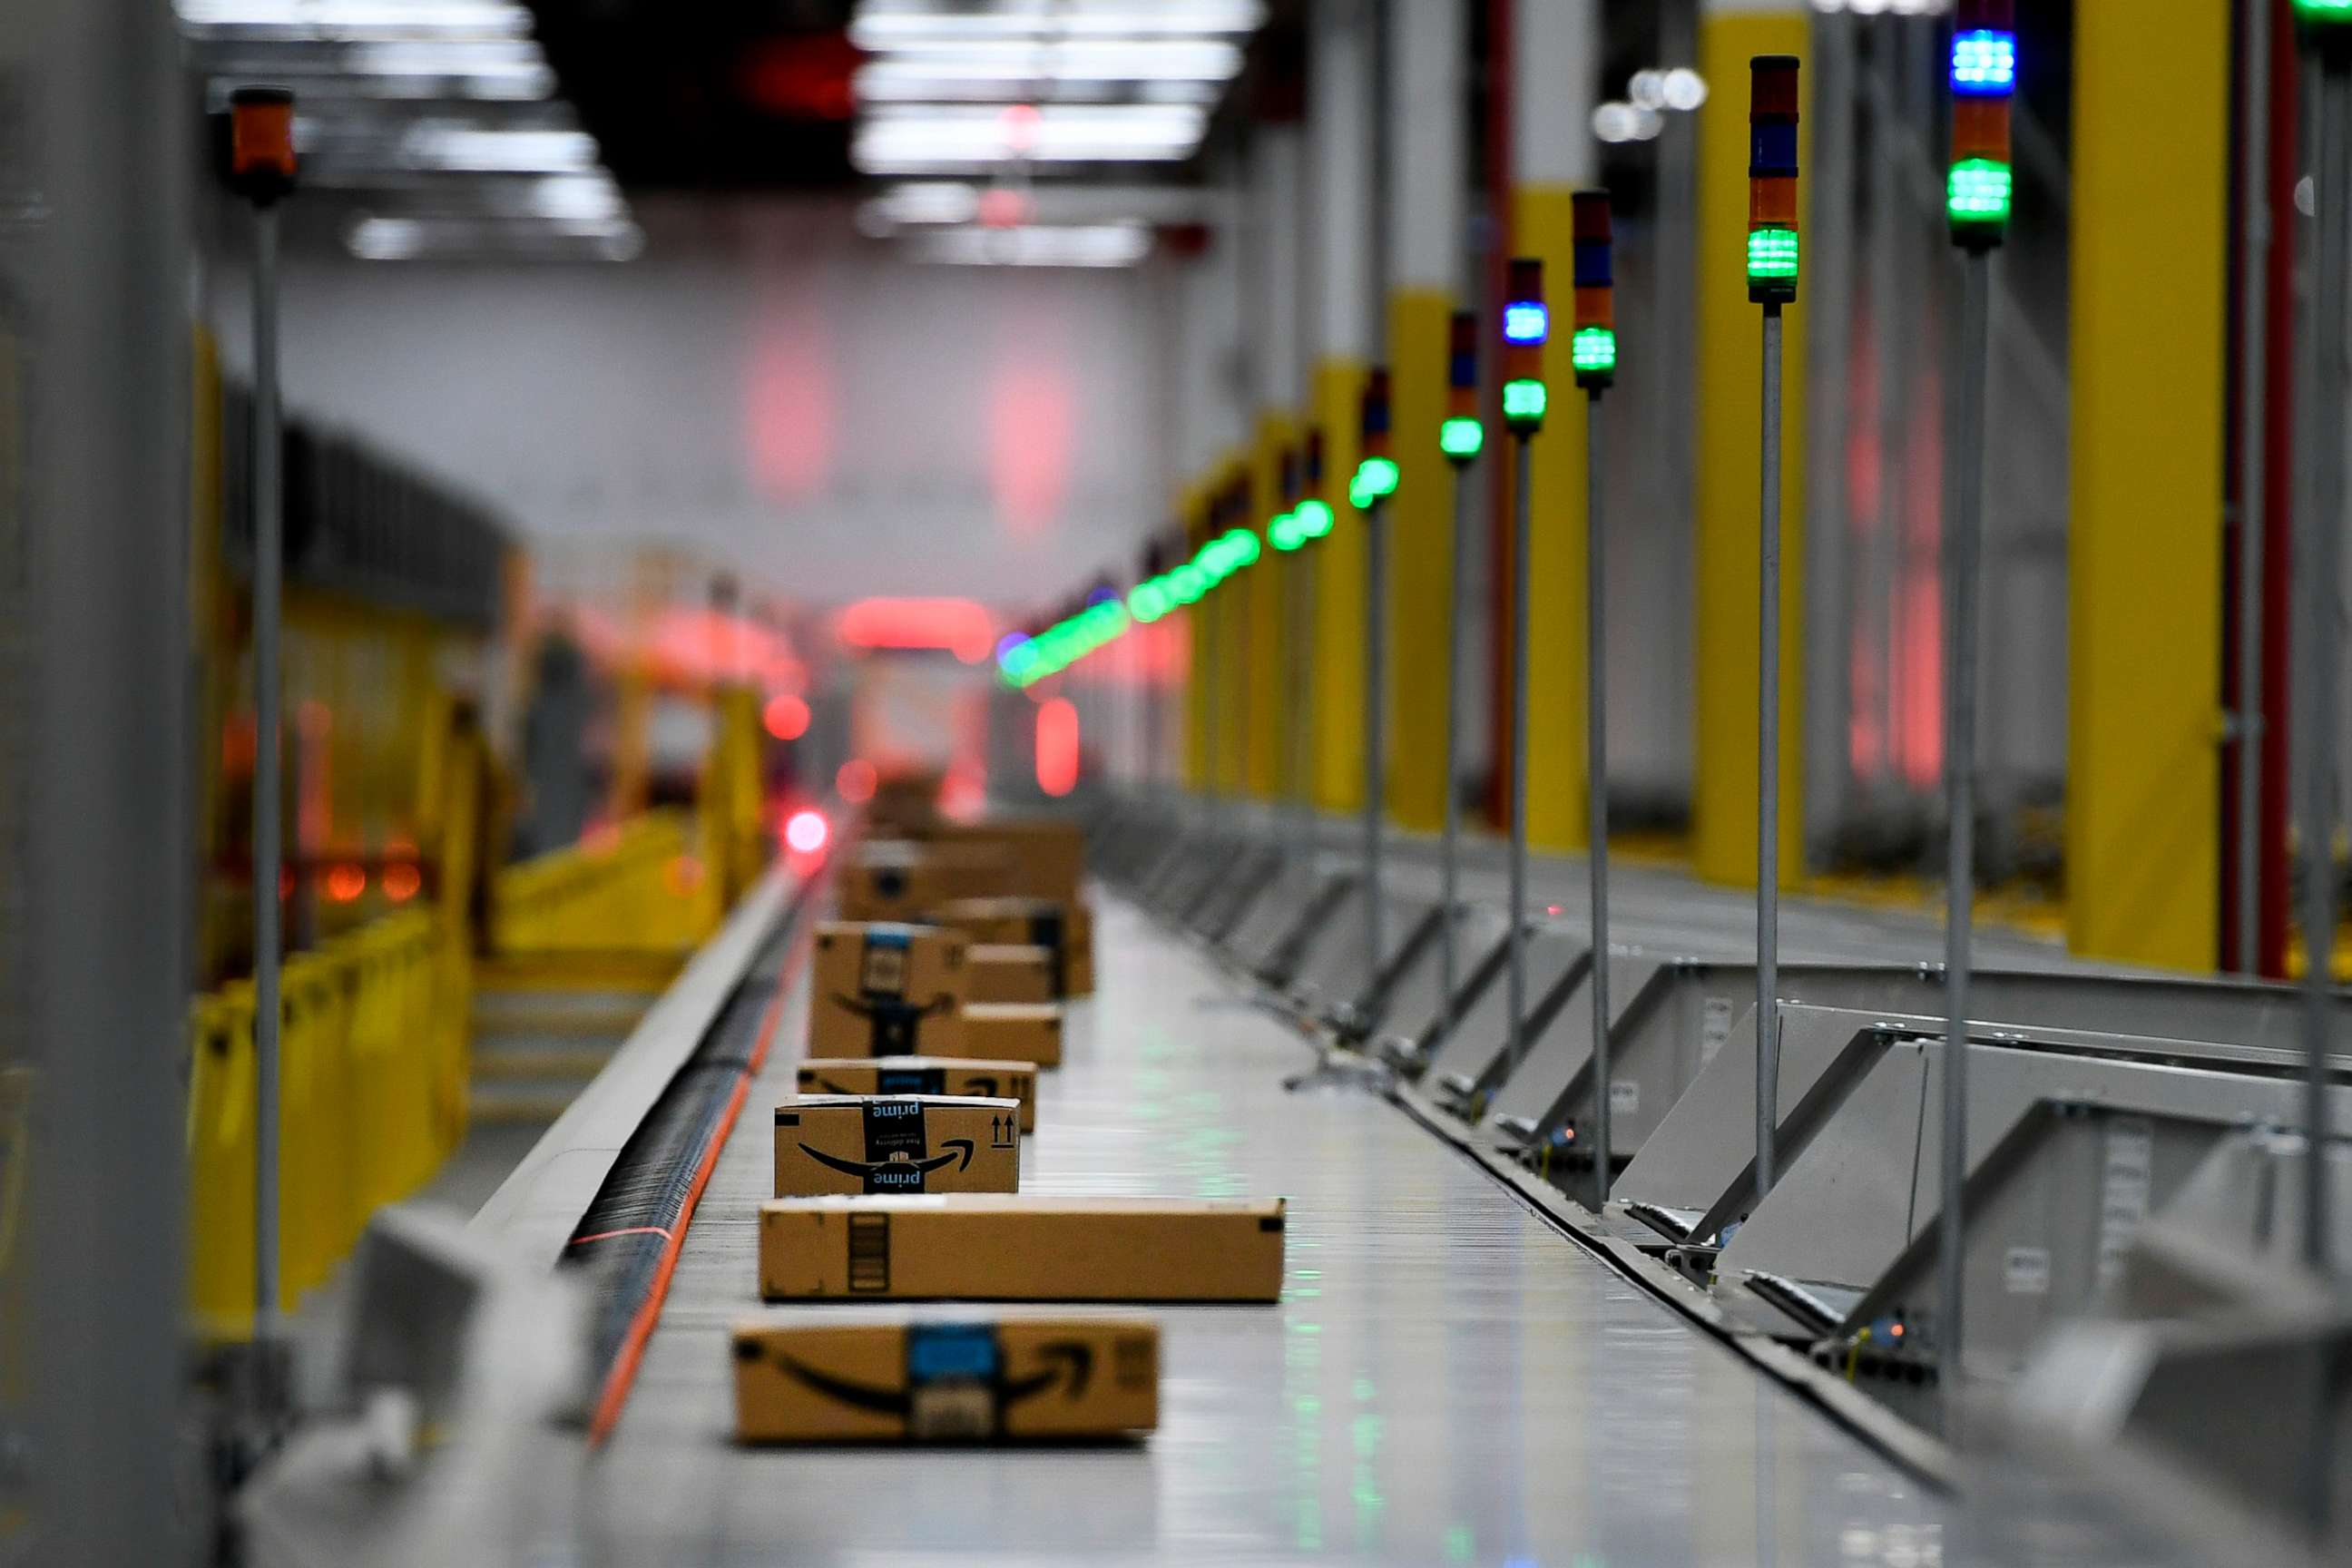 PHOTO: Boxes move along on conveyor belts at Amazon's Fulfillment Center on March 19, 2019, in Thornton, Colo.